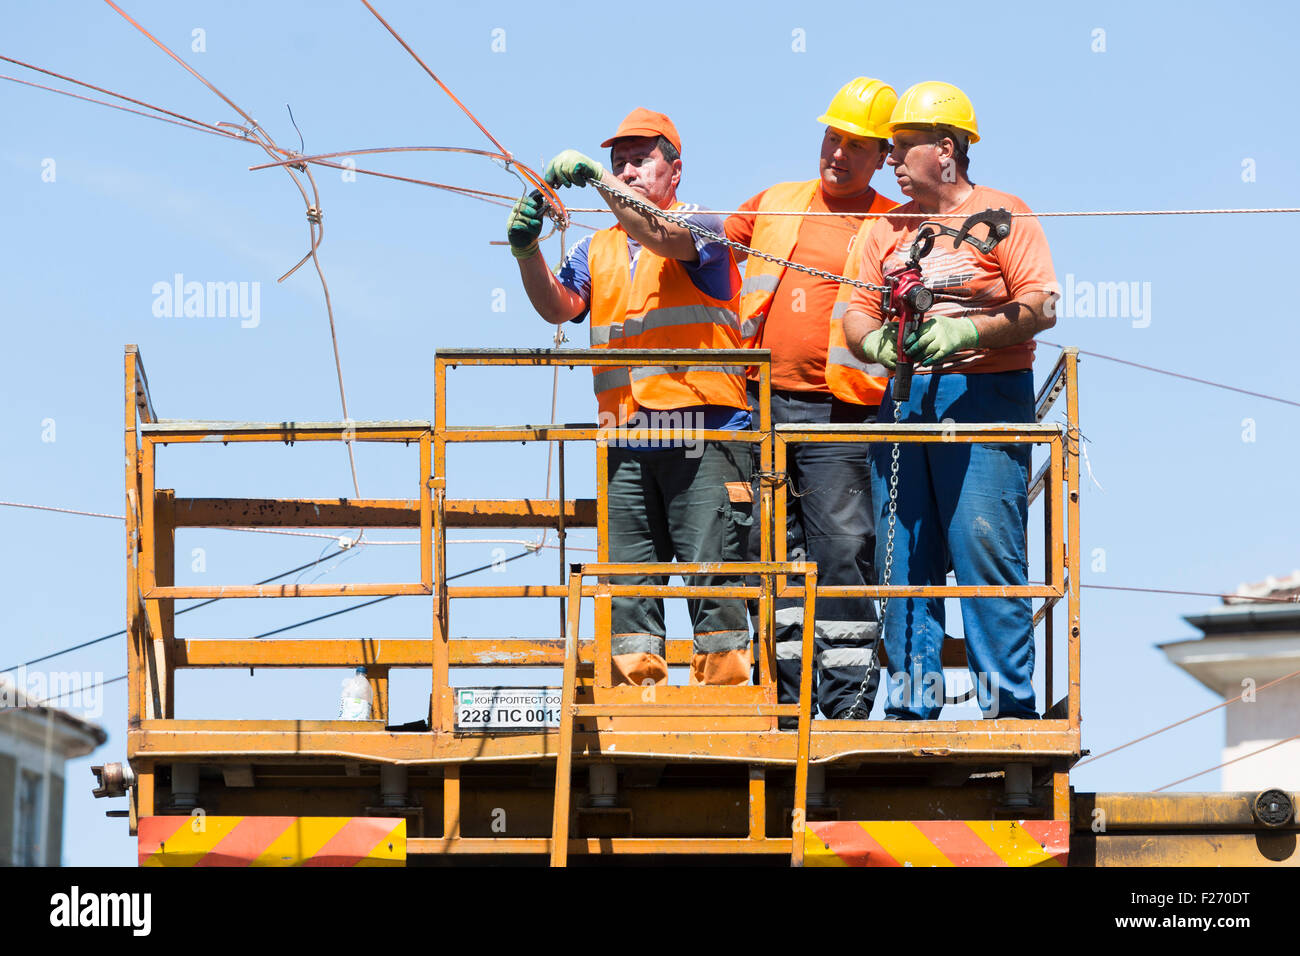 Sofia, Bulgaria - August 18, 2015: Three electricity construction workers on a platform are repairing tram's wires. Stock Photo